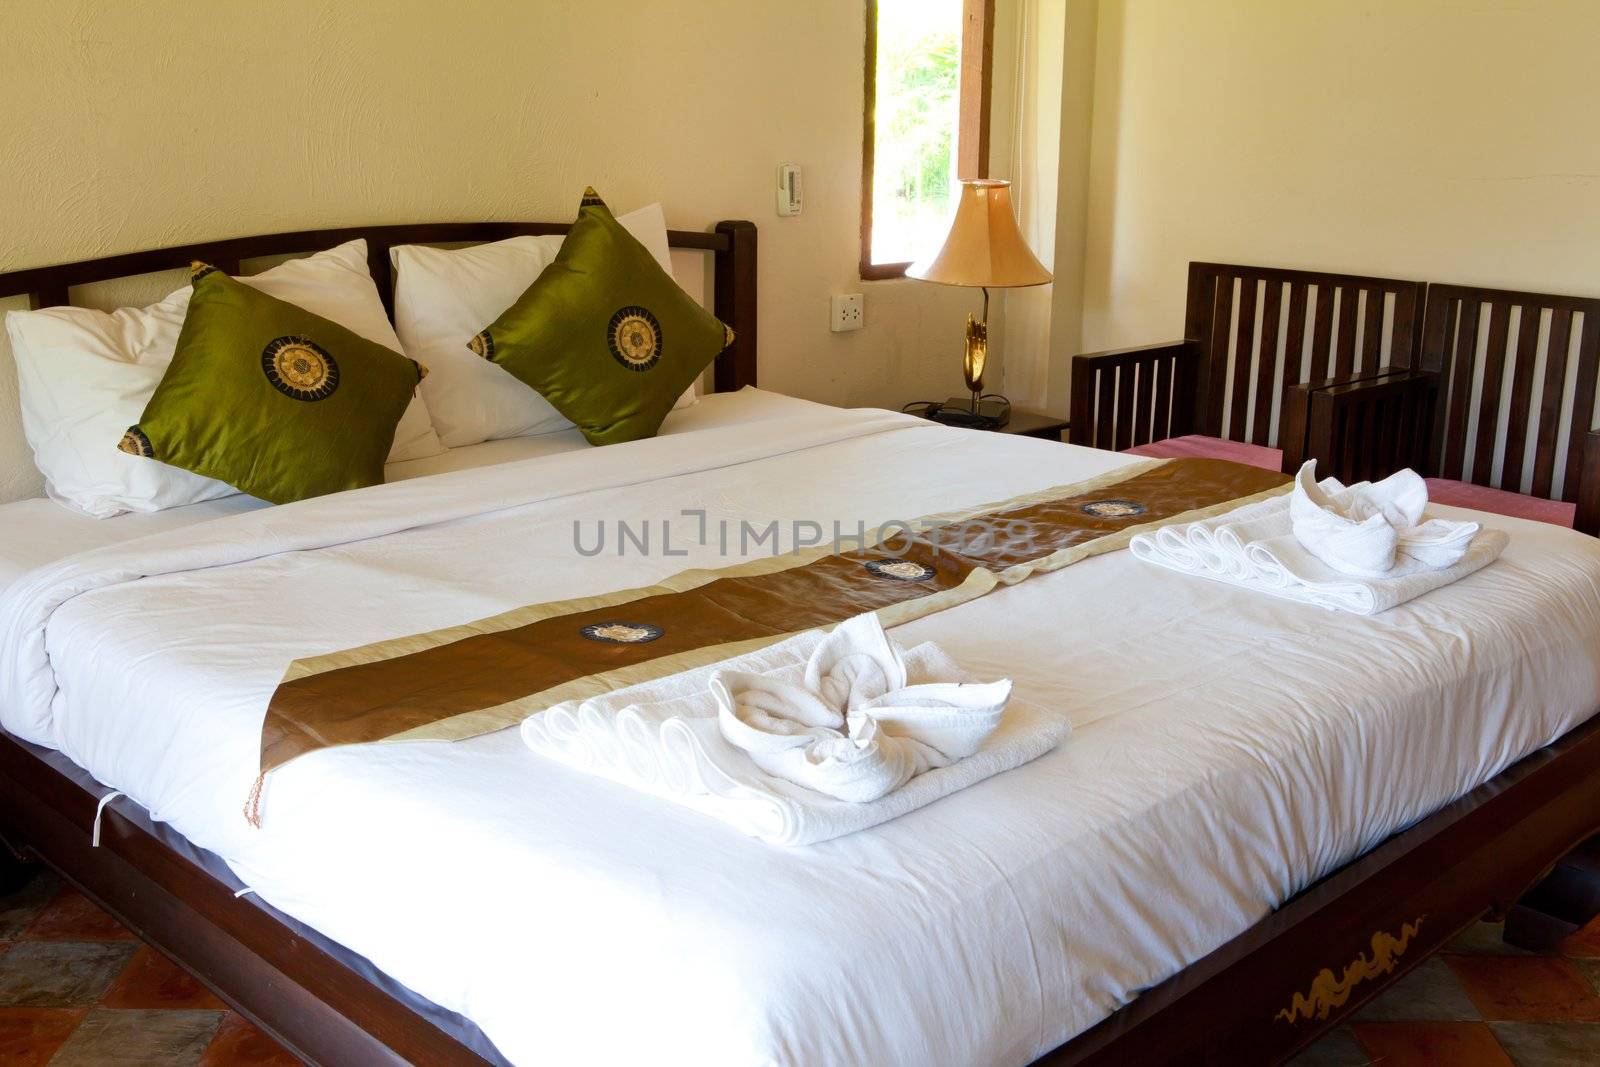 Hotel room in a tropical resort with bed and wooden flooring